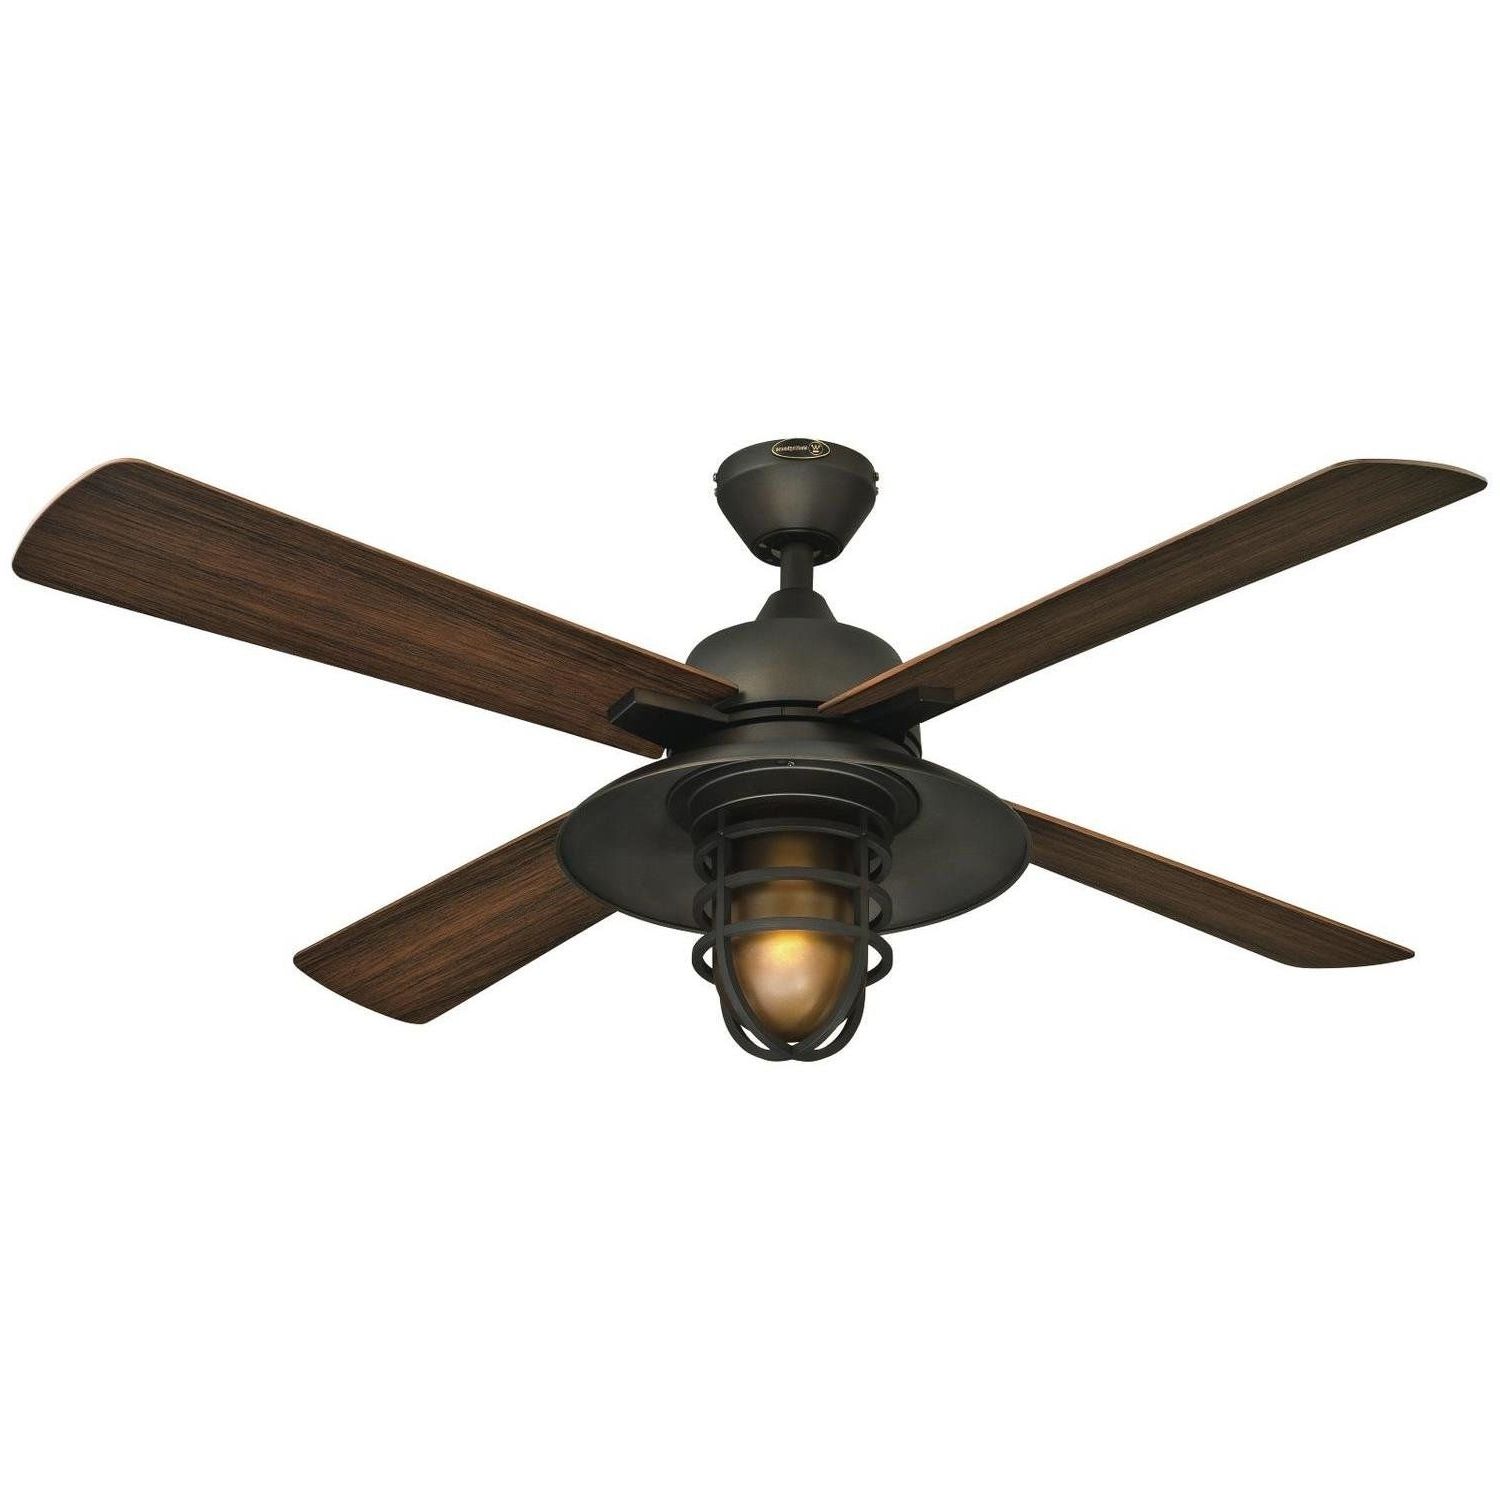 Best Rustic Ceiling Fans You Ull Love Wayfair Pict For With Lights Inside Most Up To Date Modern Hampton Bay Outdoor Lighting At Wayfair (View 10 of 20)